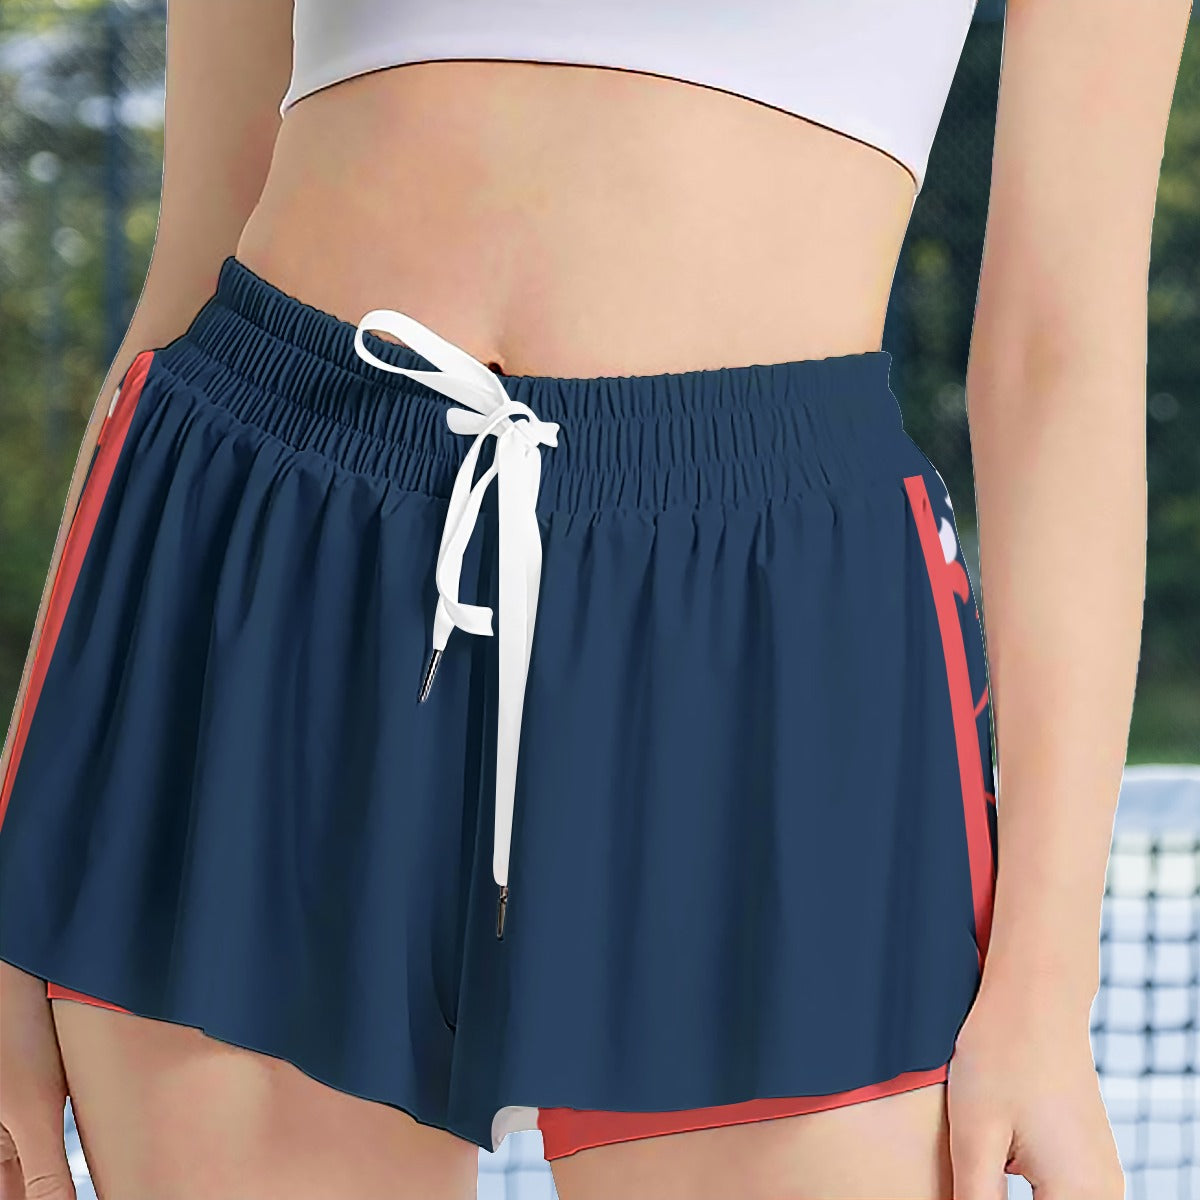 Van - Navy Blue/Blue Petals - Pickleball Women's Sport Culottes with Pockets by Dizzy Pickle